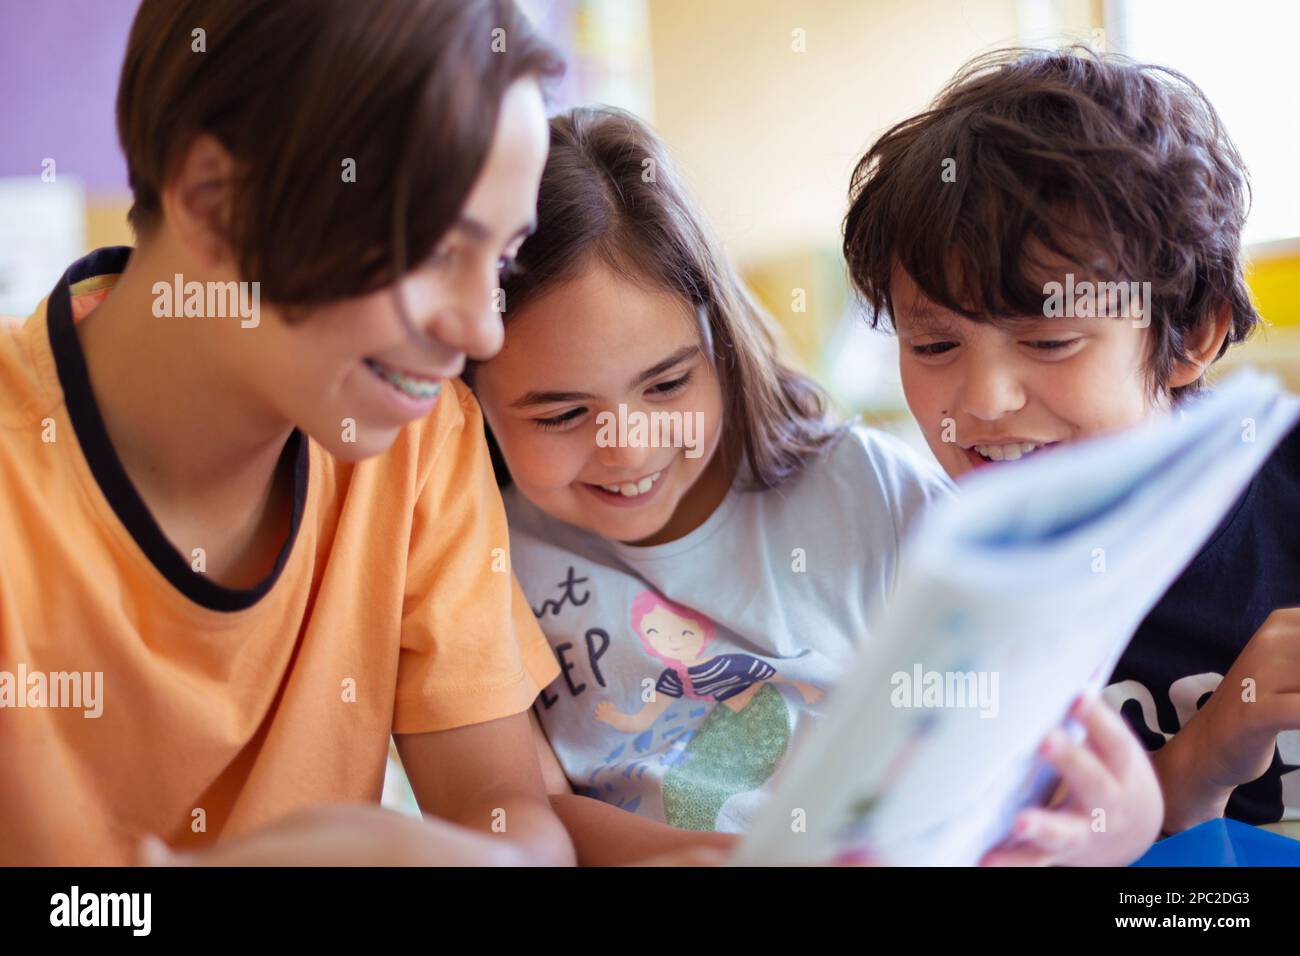 Group of Caucasian children studying fun in class. They are smiling while reading a school book. Stock Photo